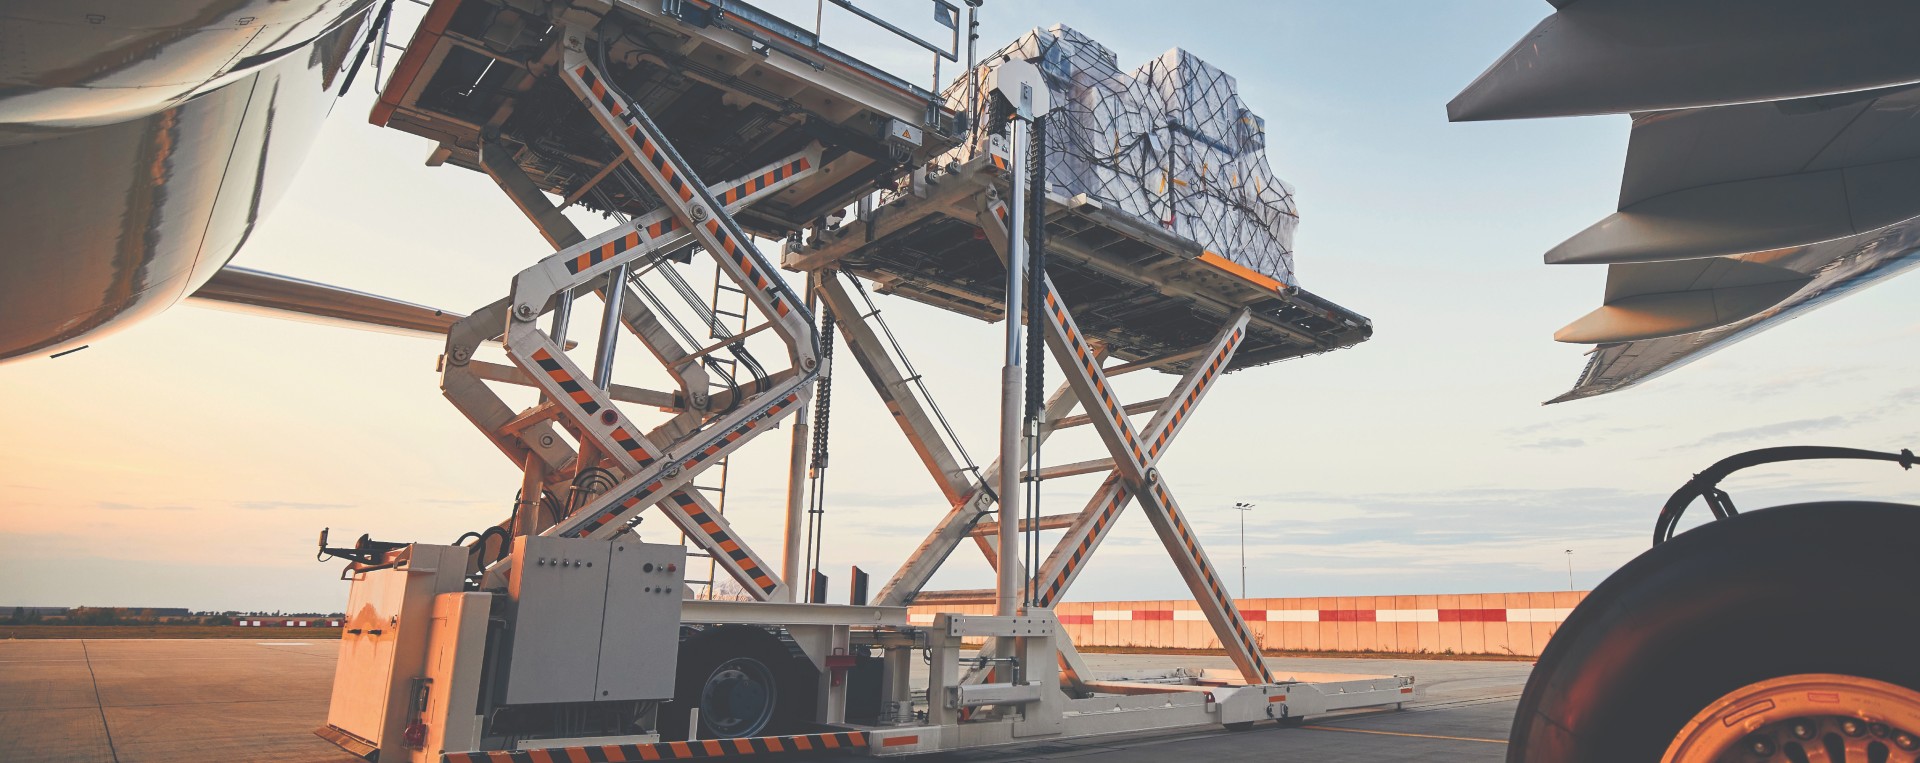 Delivering a Flexible, Scalable, Well-connected Cargo Ground-handling System in 20 Terminals across 11 Countries